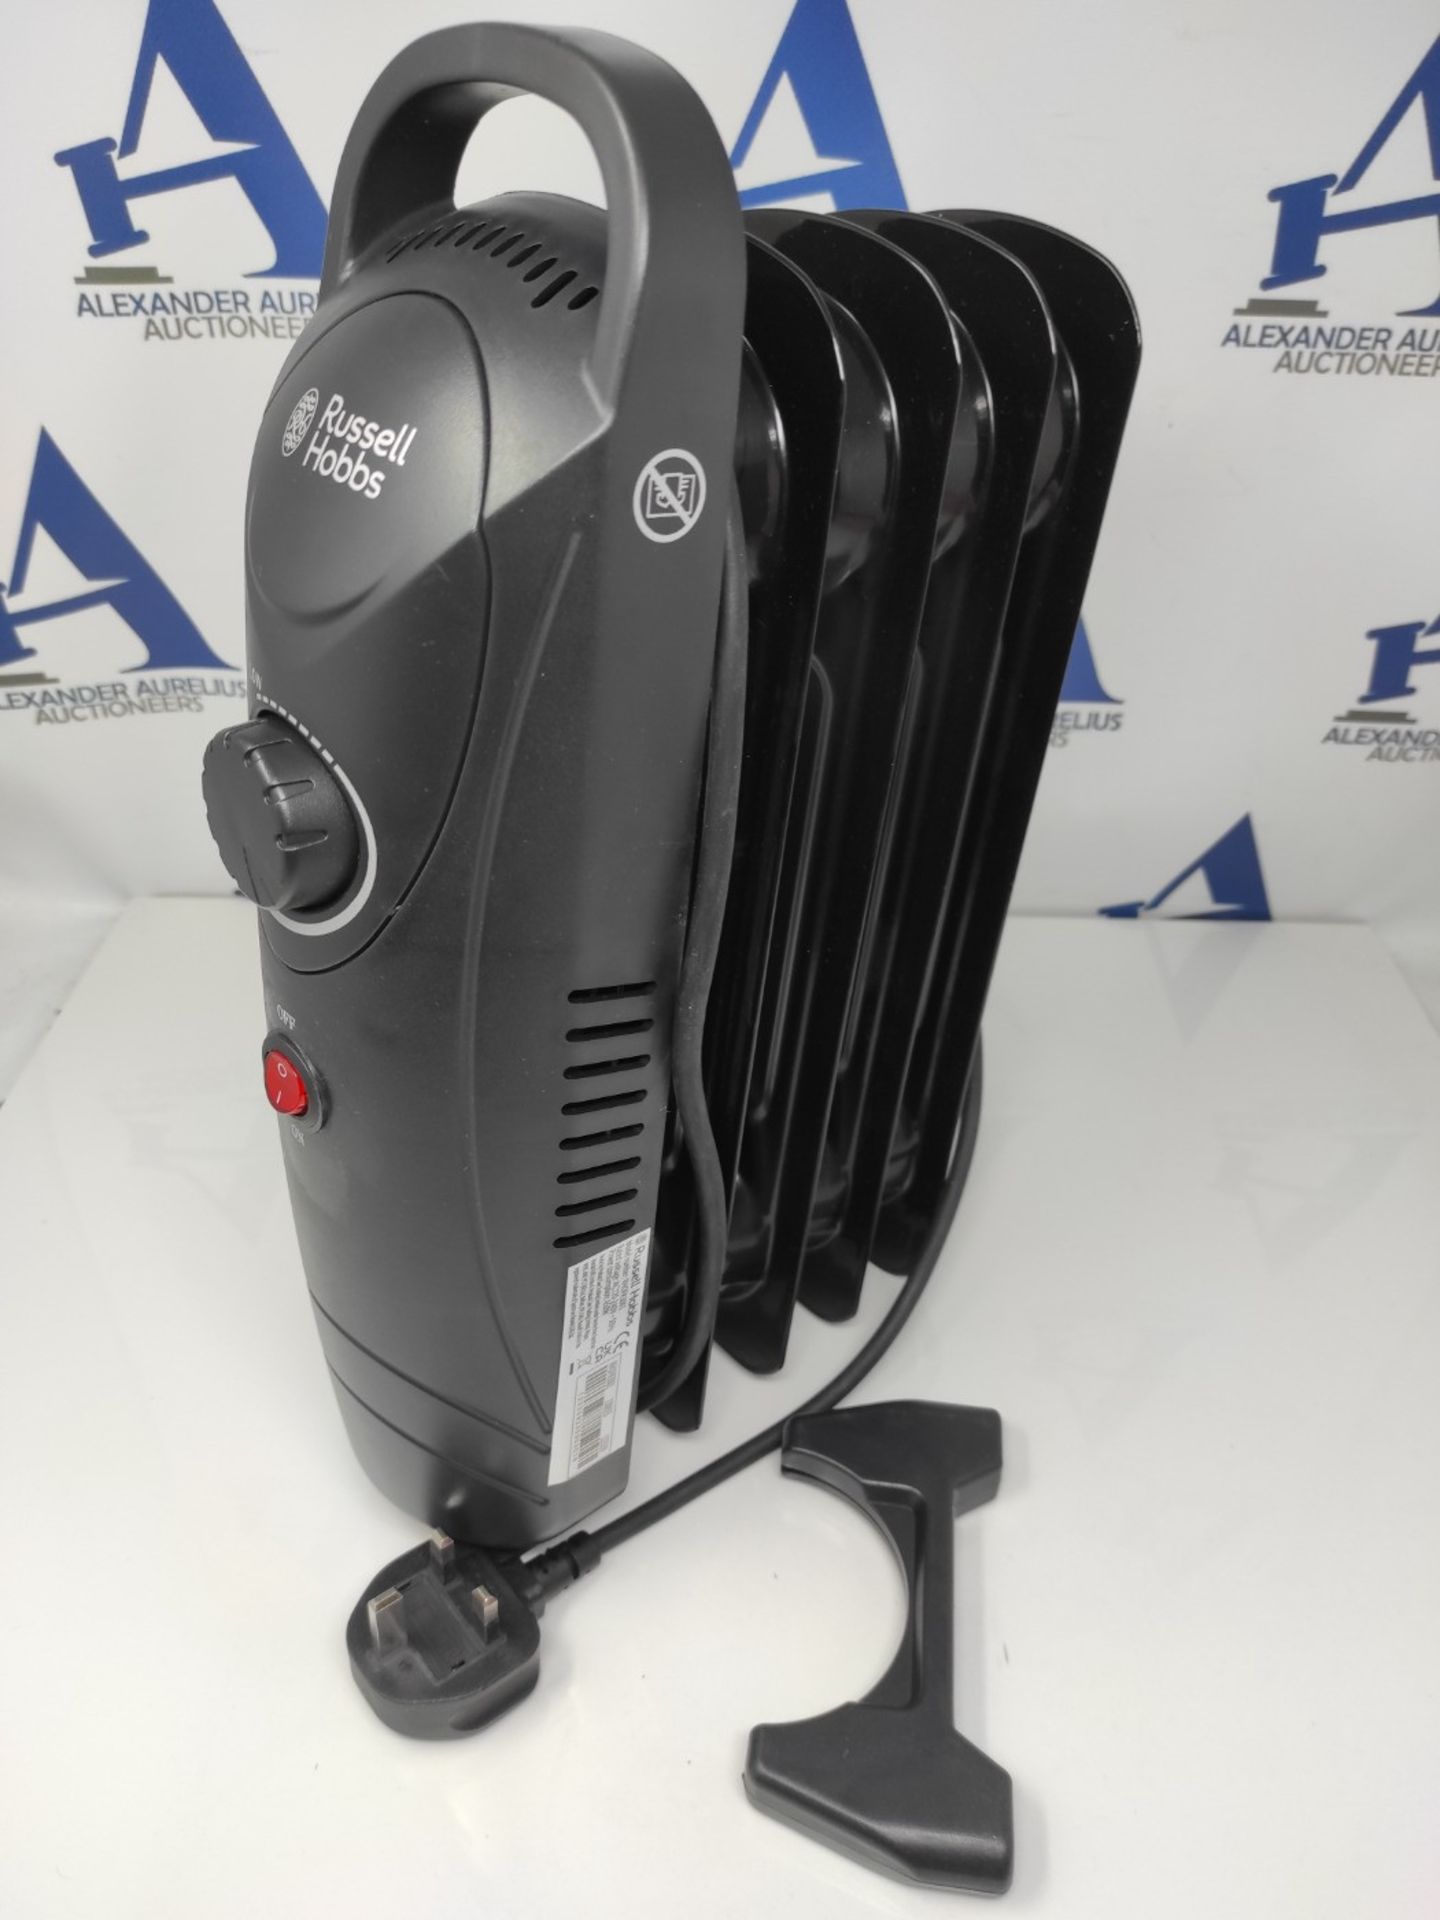 Russell Hobbs 650W Oil Filled Radiator, 5 Fin Portable Electric Heater - Black, Adjust - Image 2 of 2